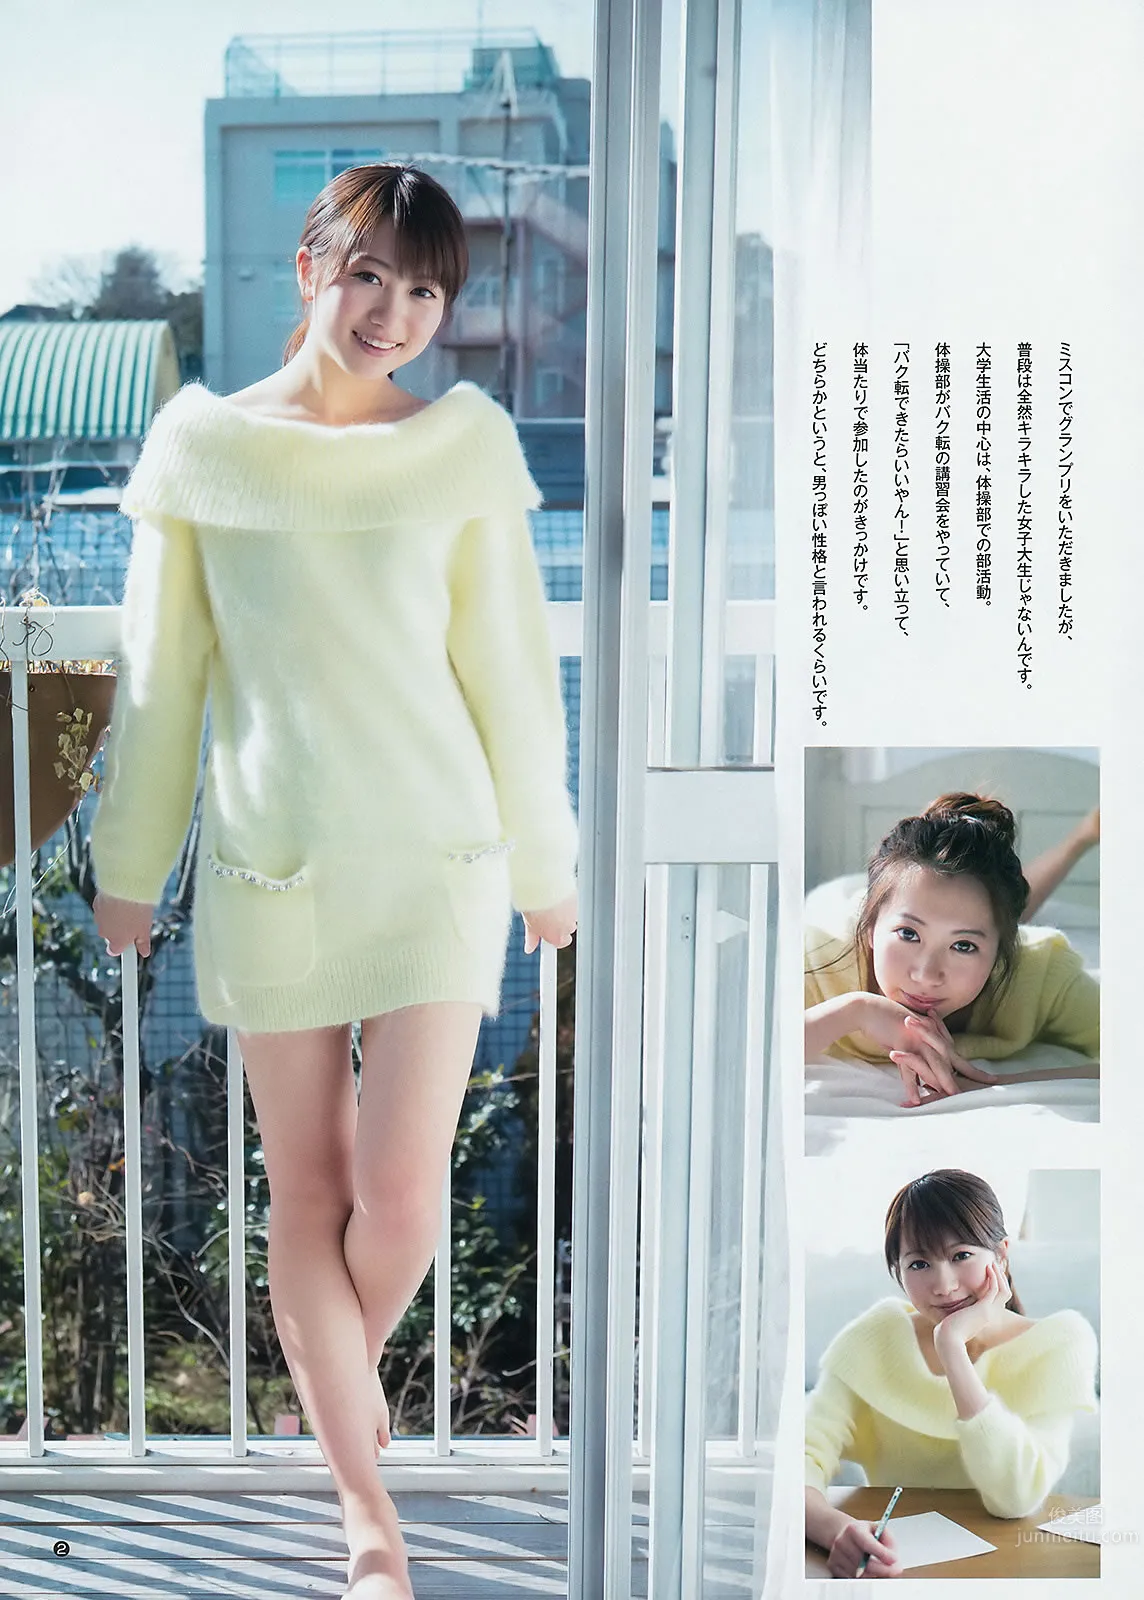 [Weekly Young Jump] 2015 No.10 11 最上もが 藤泽季美歌 佐藤美希_22